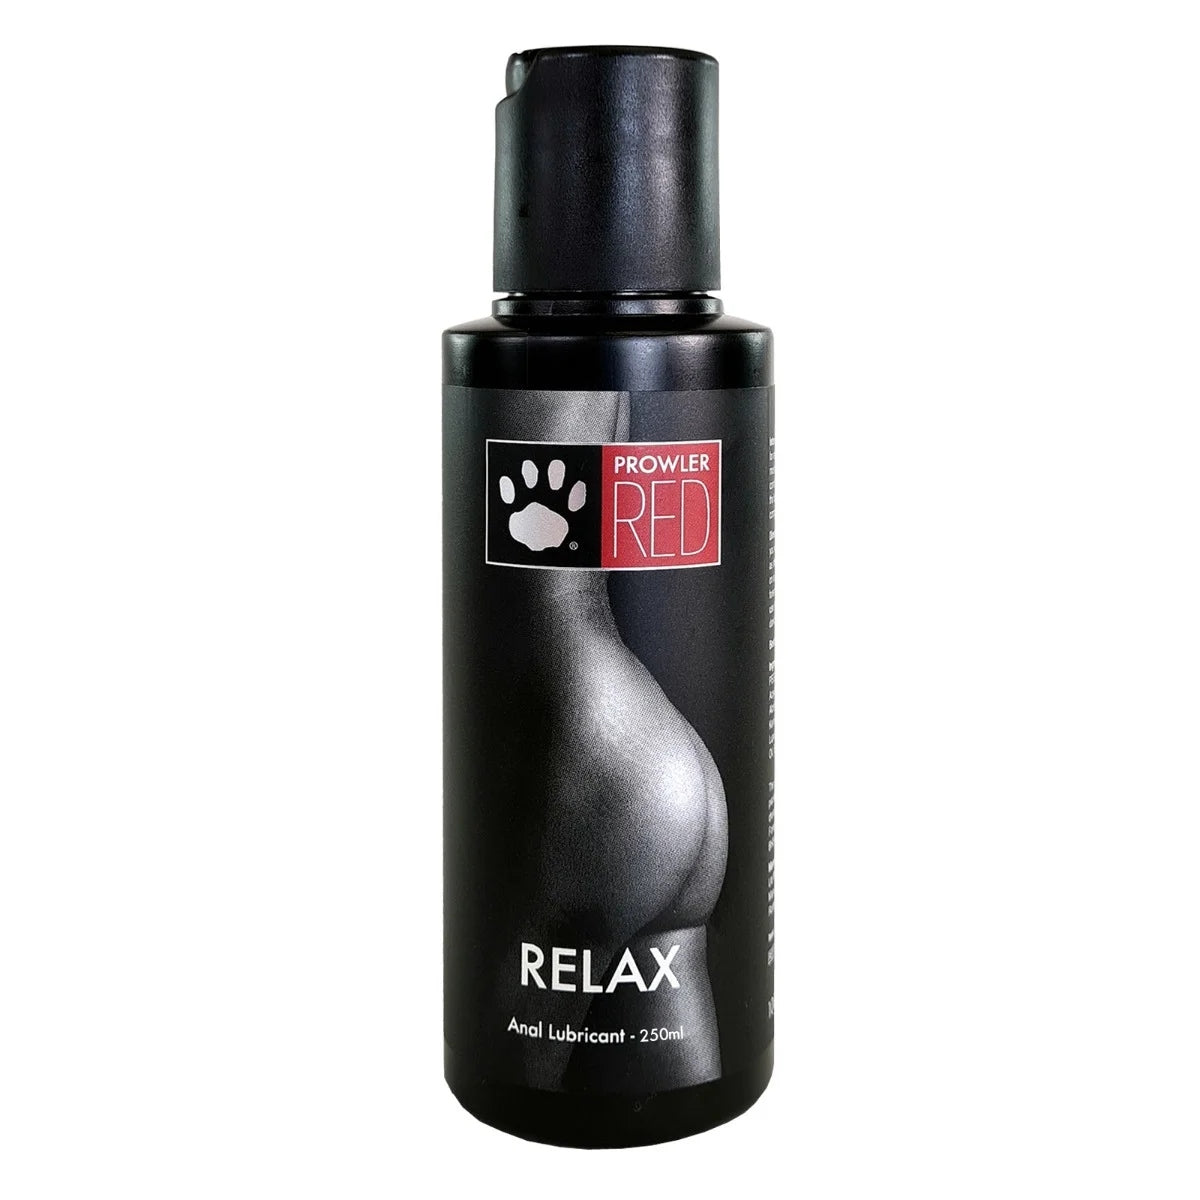 Prowler RED Relax Anal Water Based Lube 250ml